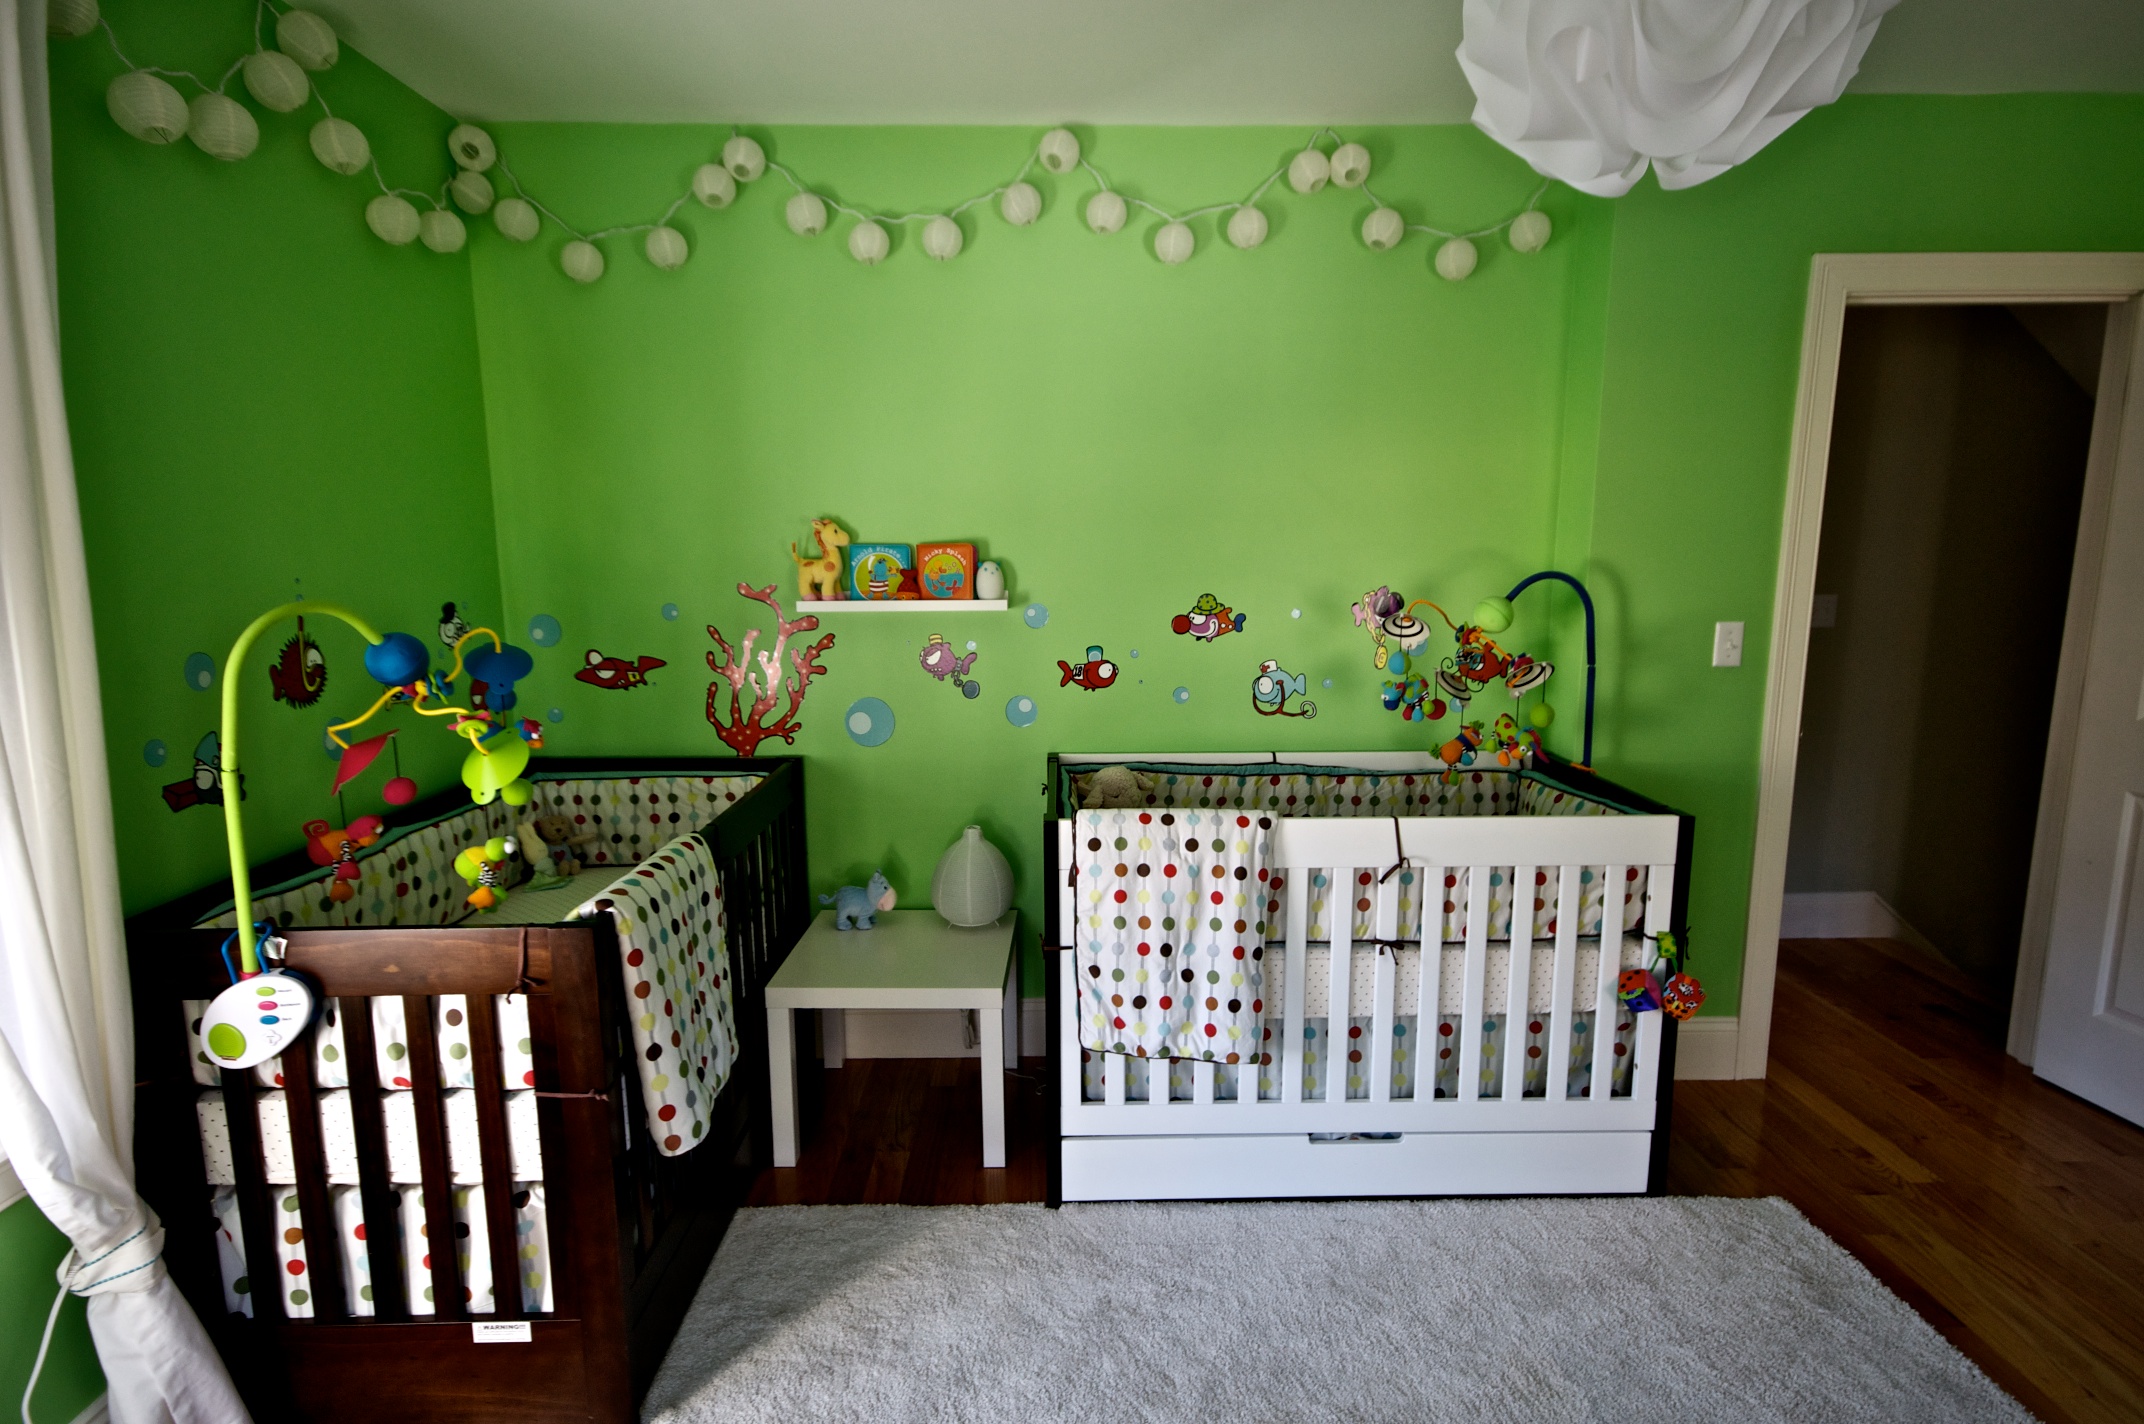 Childproofing Gear that's Practical and Cool - Project Nursery